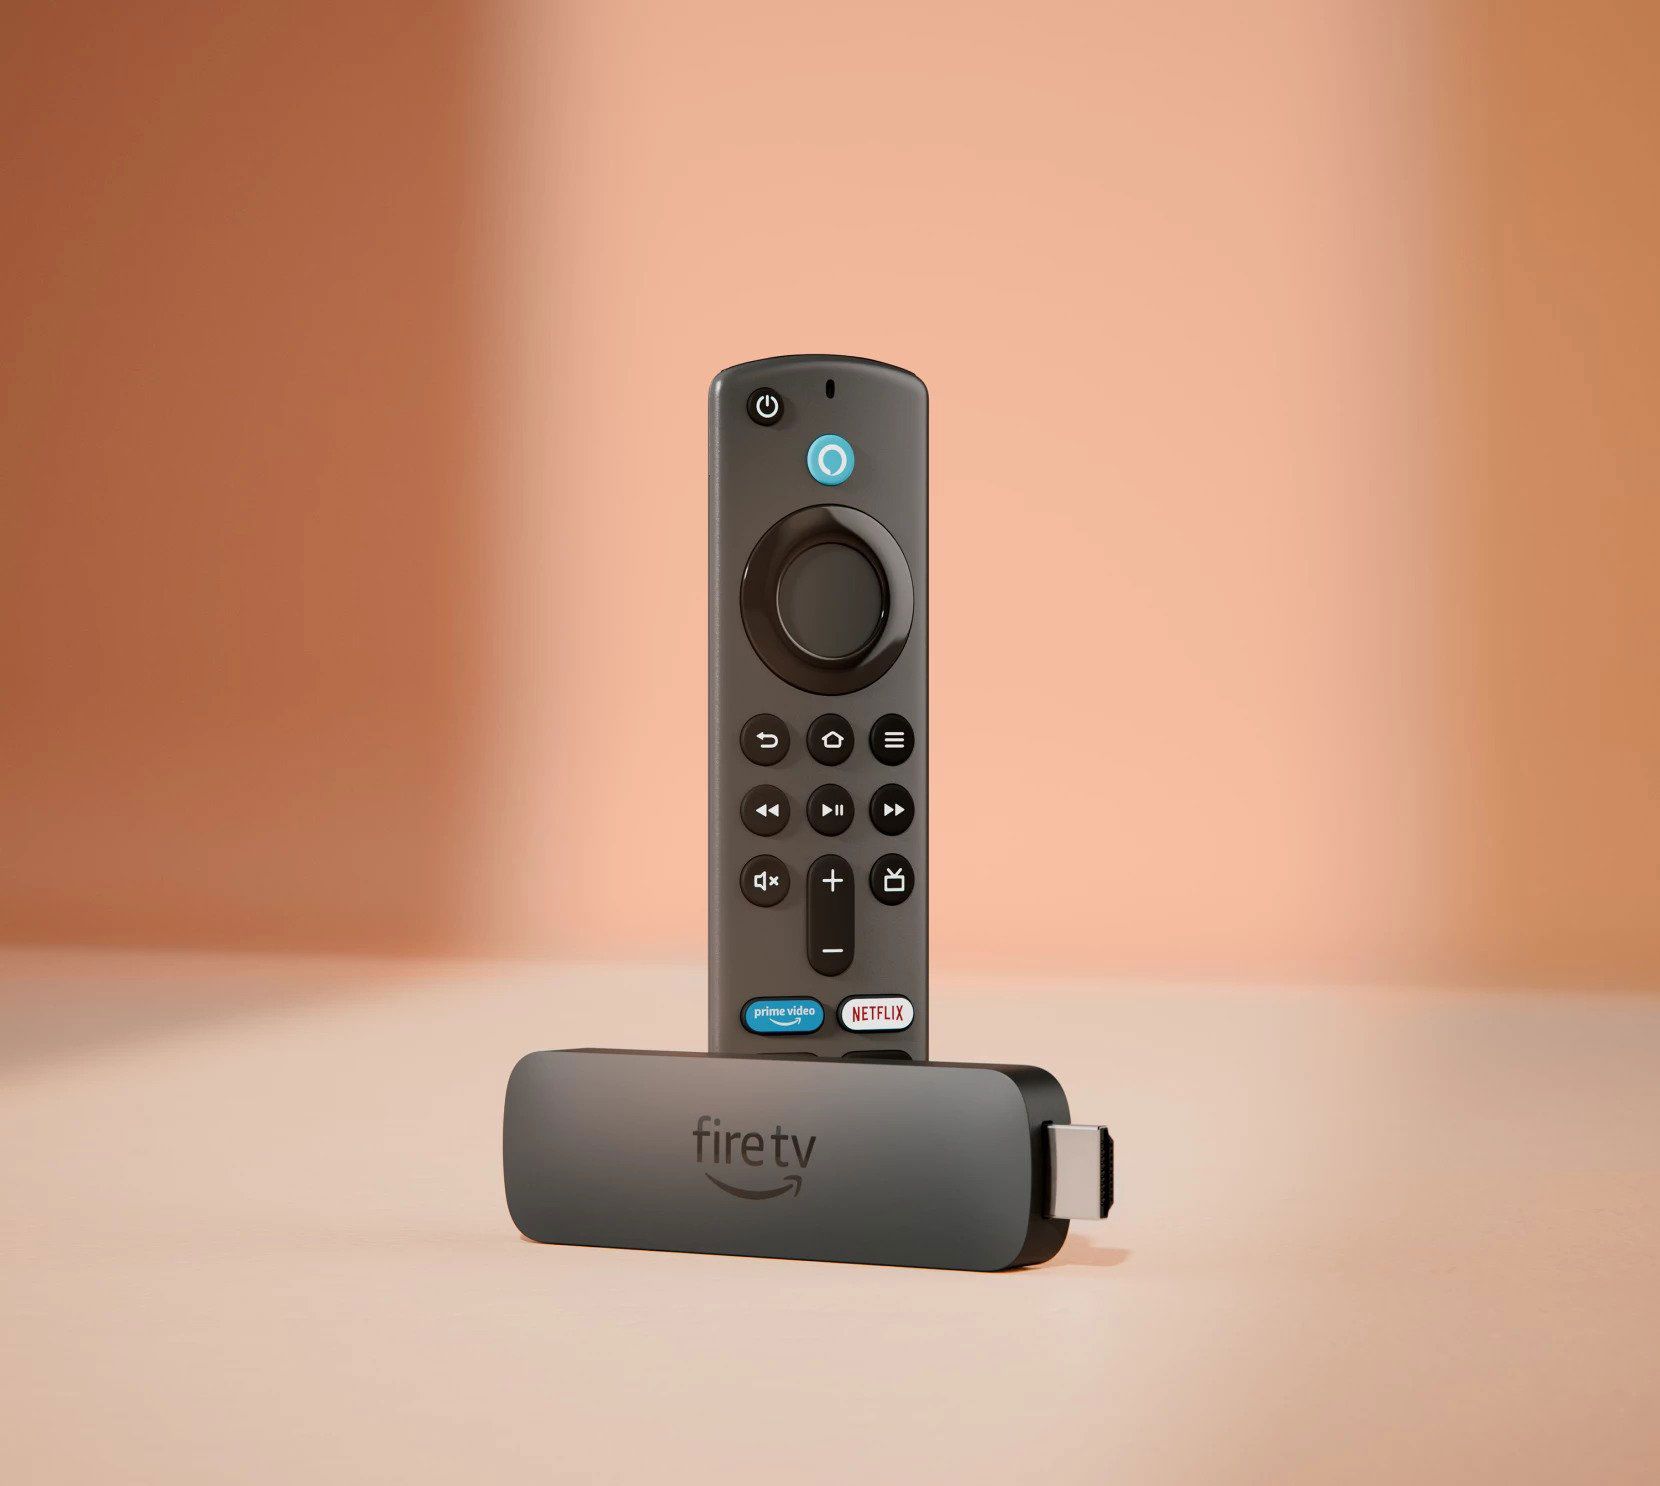 s new Fire TV Stick 4K and 4K Max already have Black Friday